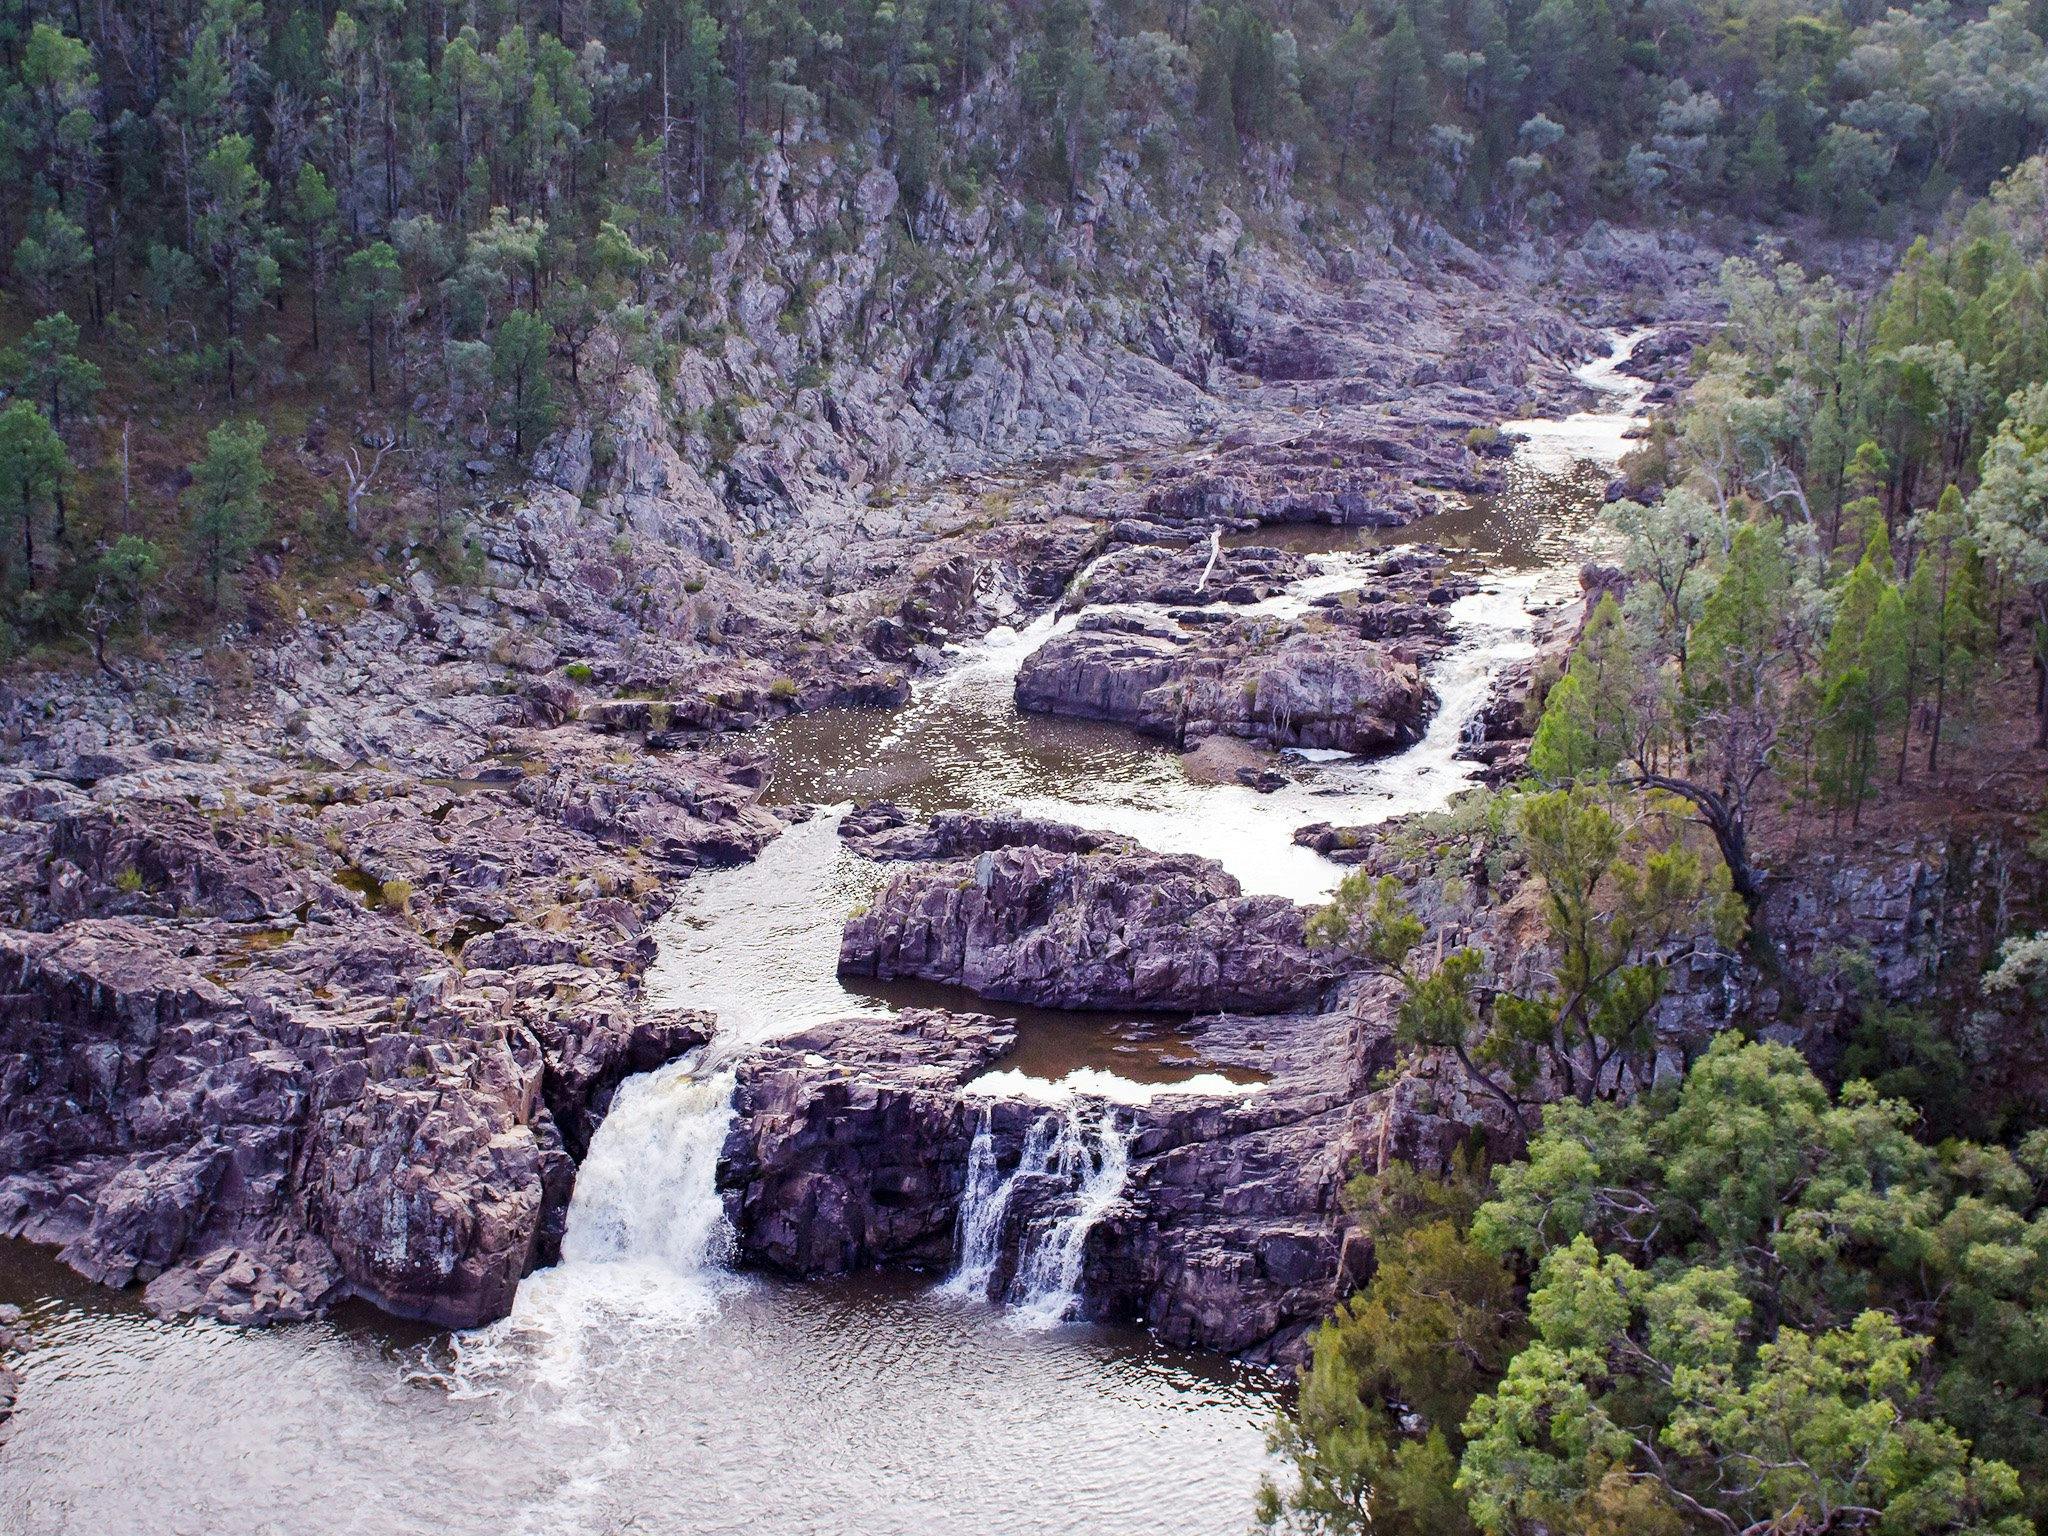 River and small falls in rocky ravine.